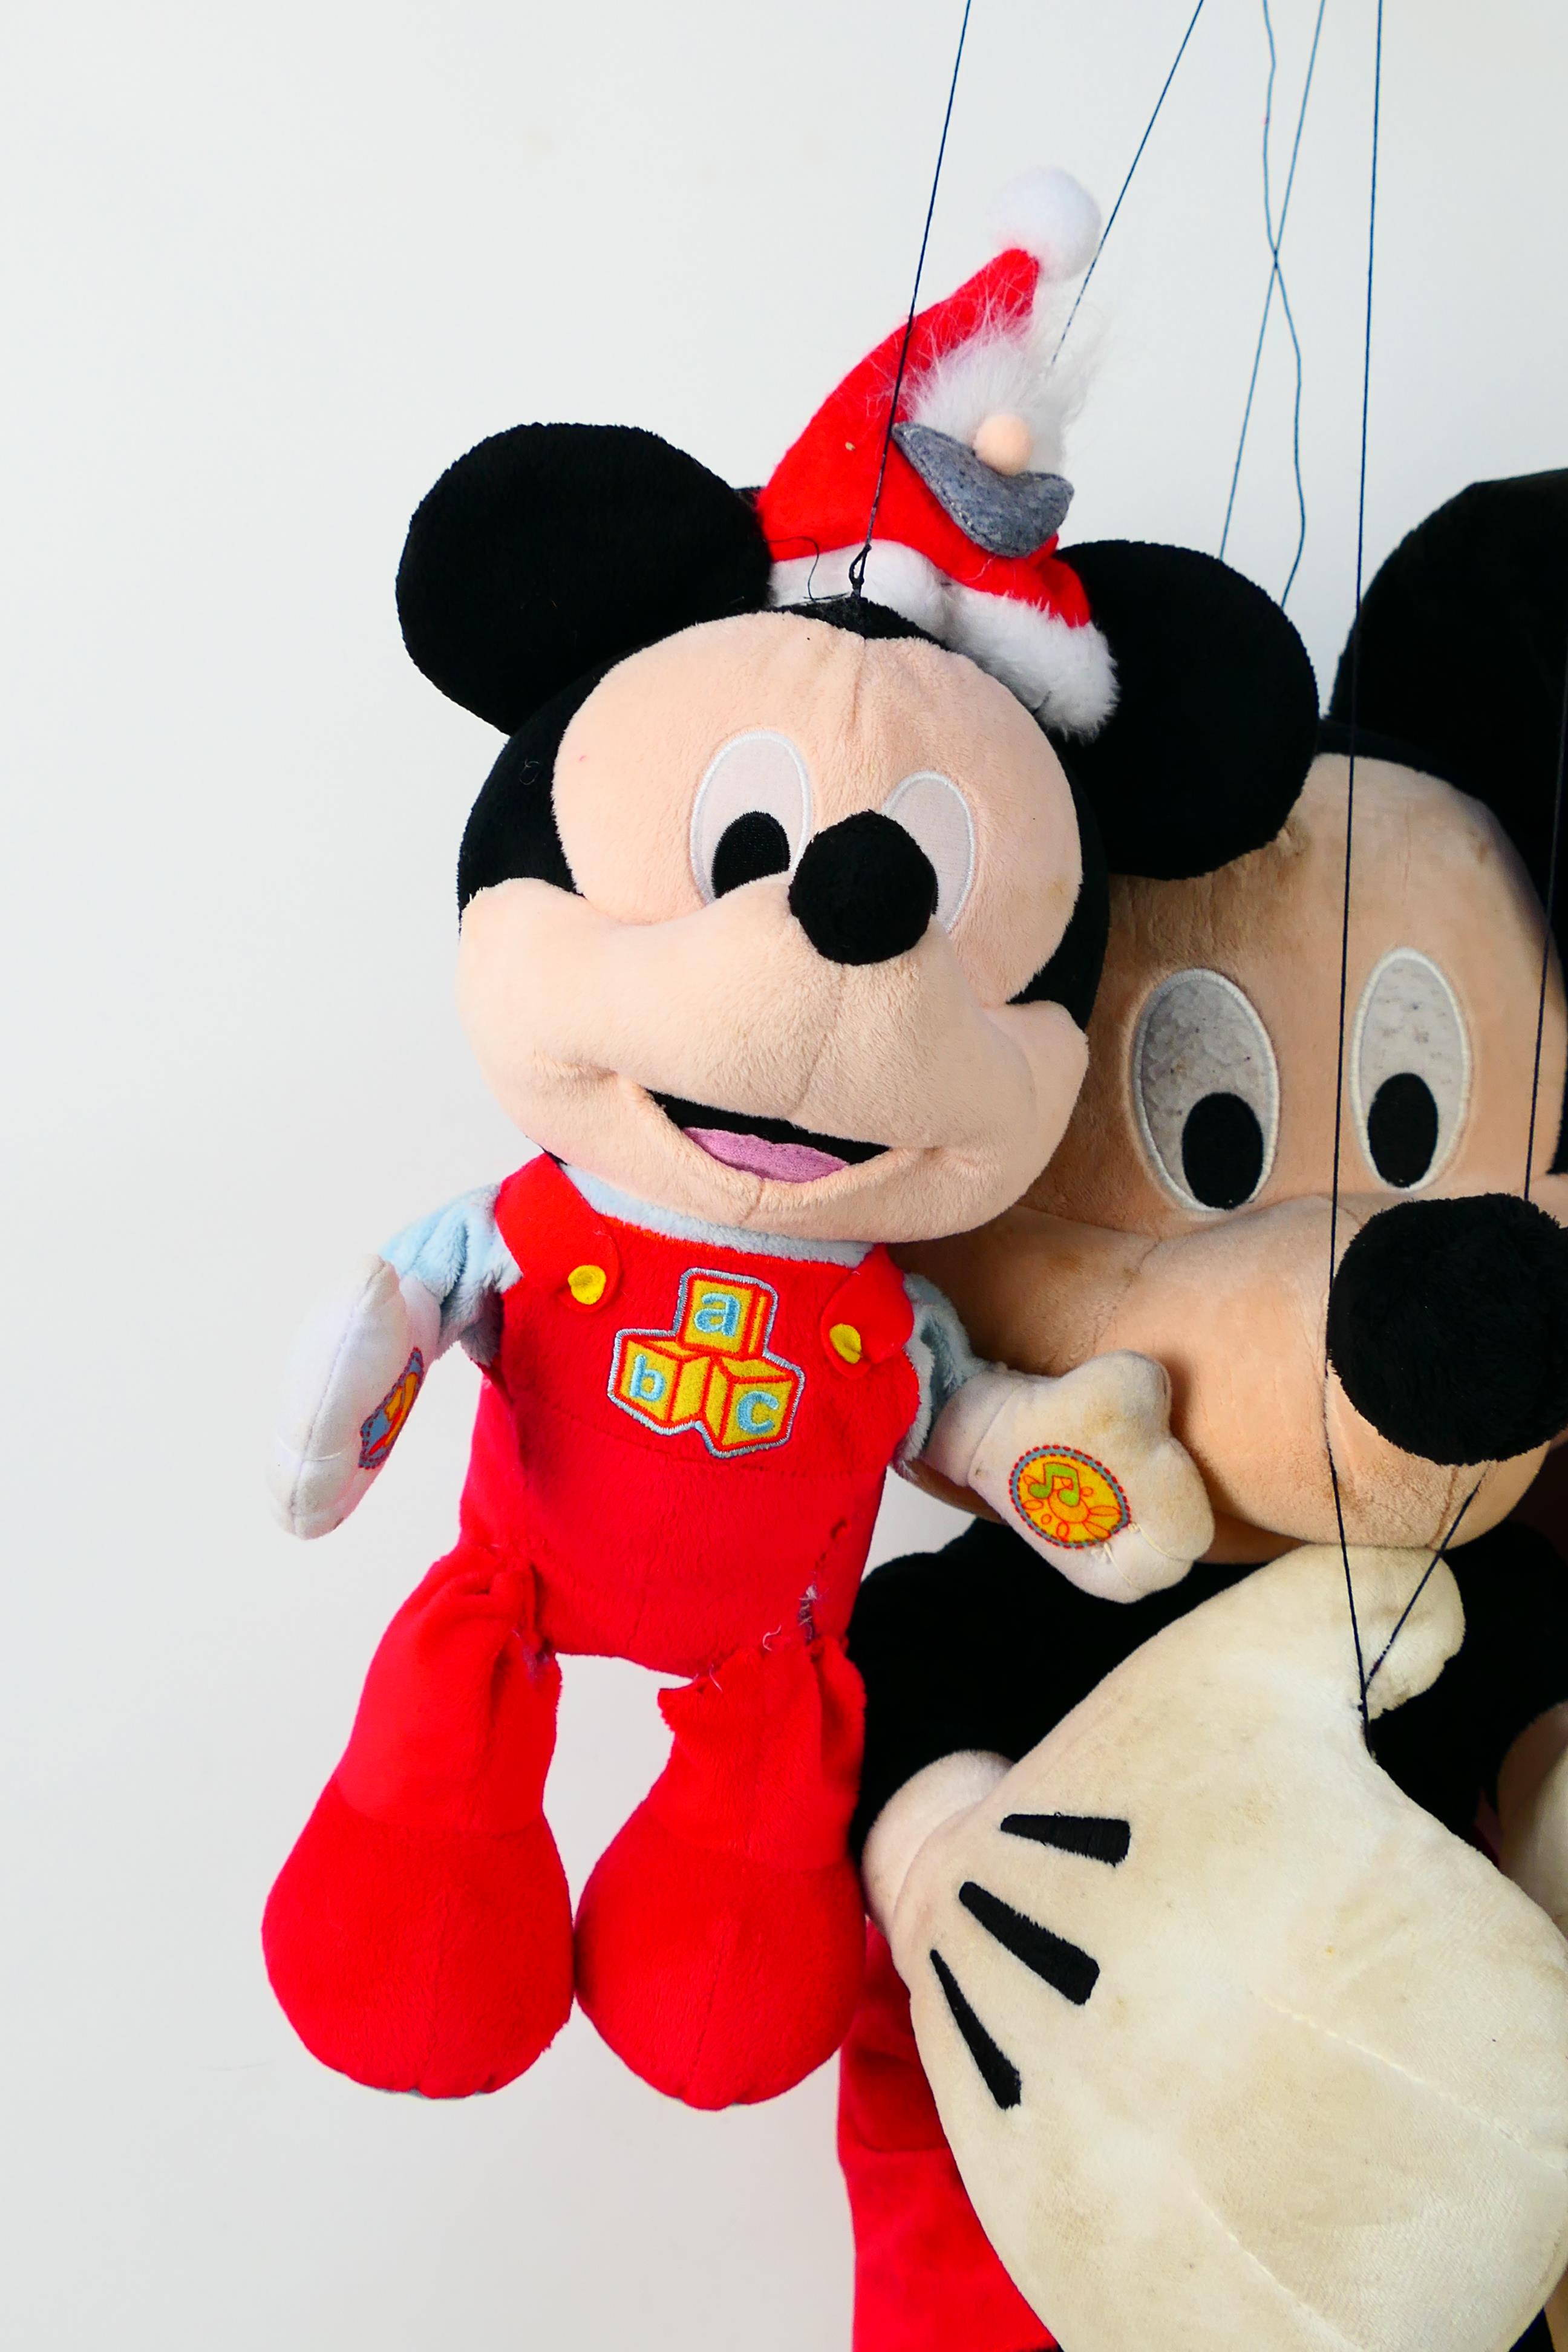 Marionettes - Mickey Mouse - Minnie Mouse. - Image 2 of 5